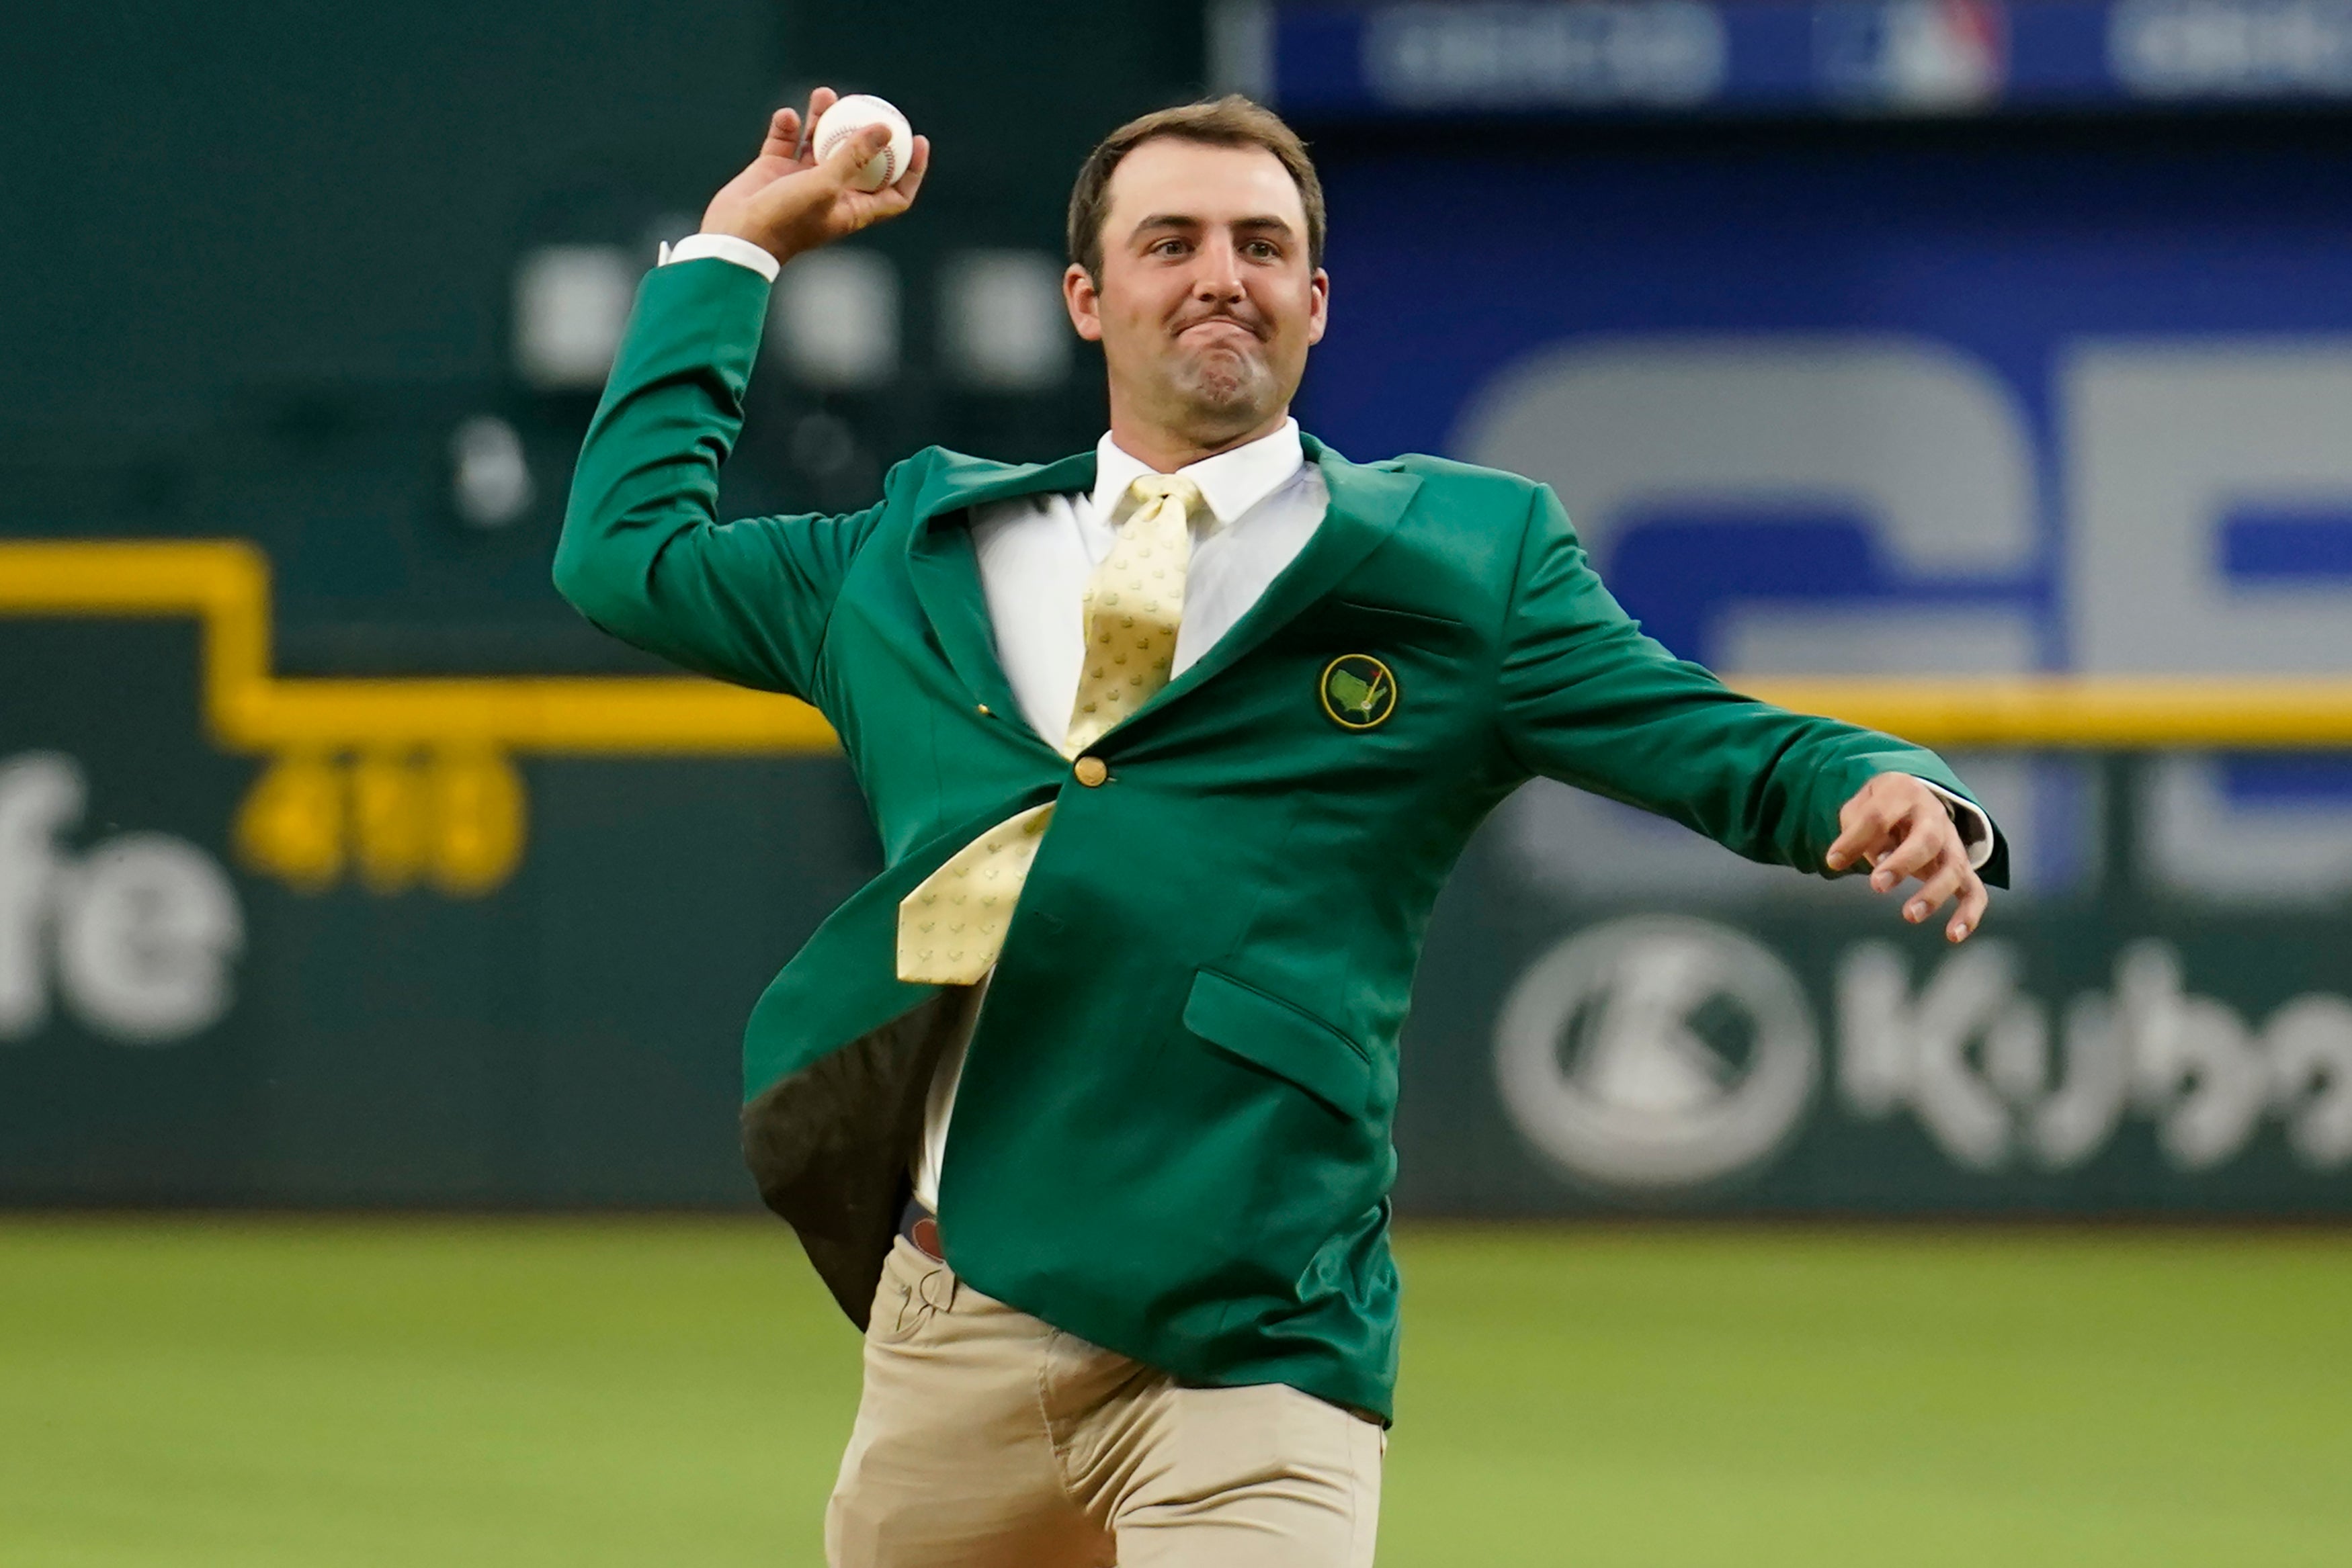 Masters champion Scottie Scheffler throws a ceremonial first pitch before the game between the Houston Astros and the Texas Rangers (Tony Gutierrez/AP)